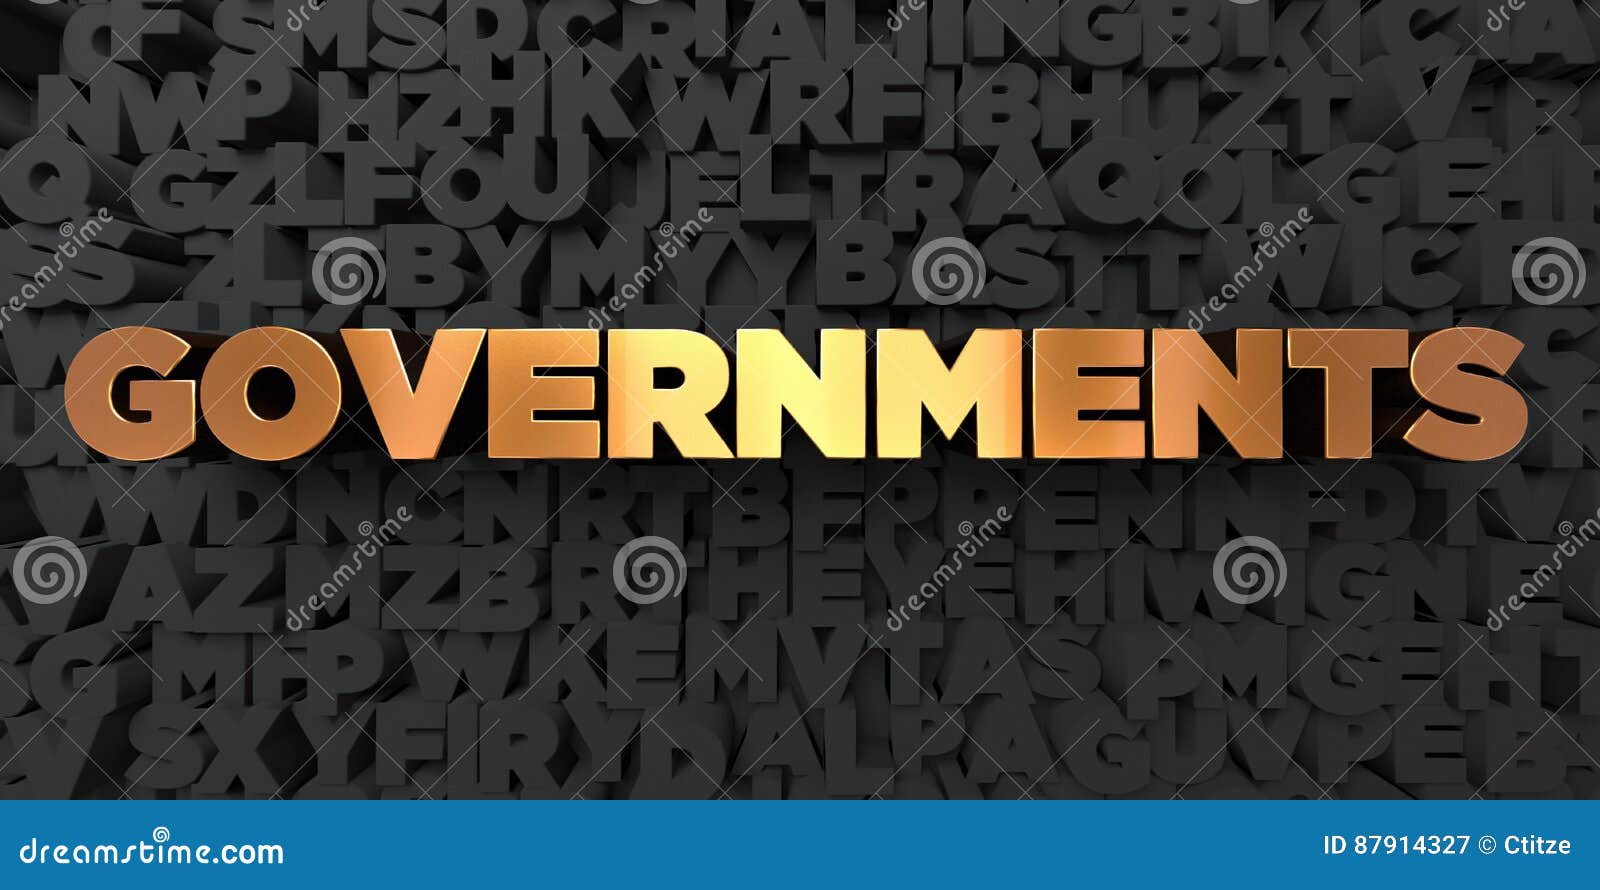 governments - gold text on black background - 3d rendered royalty free stock picture